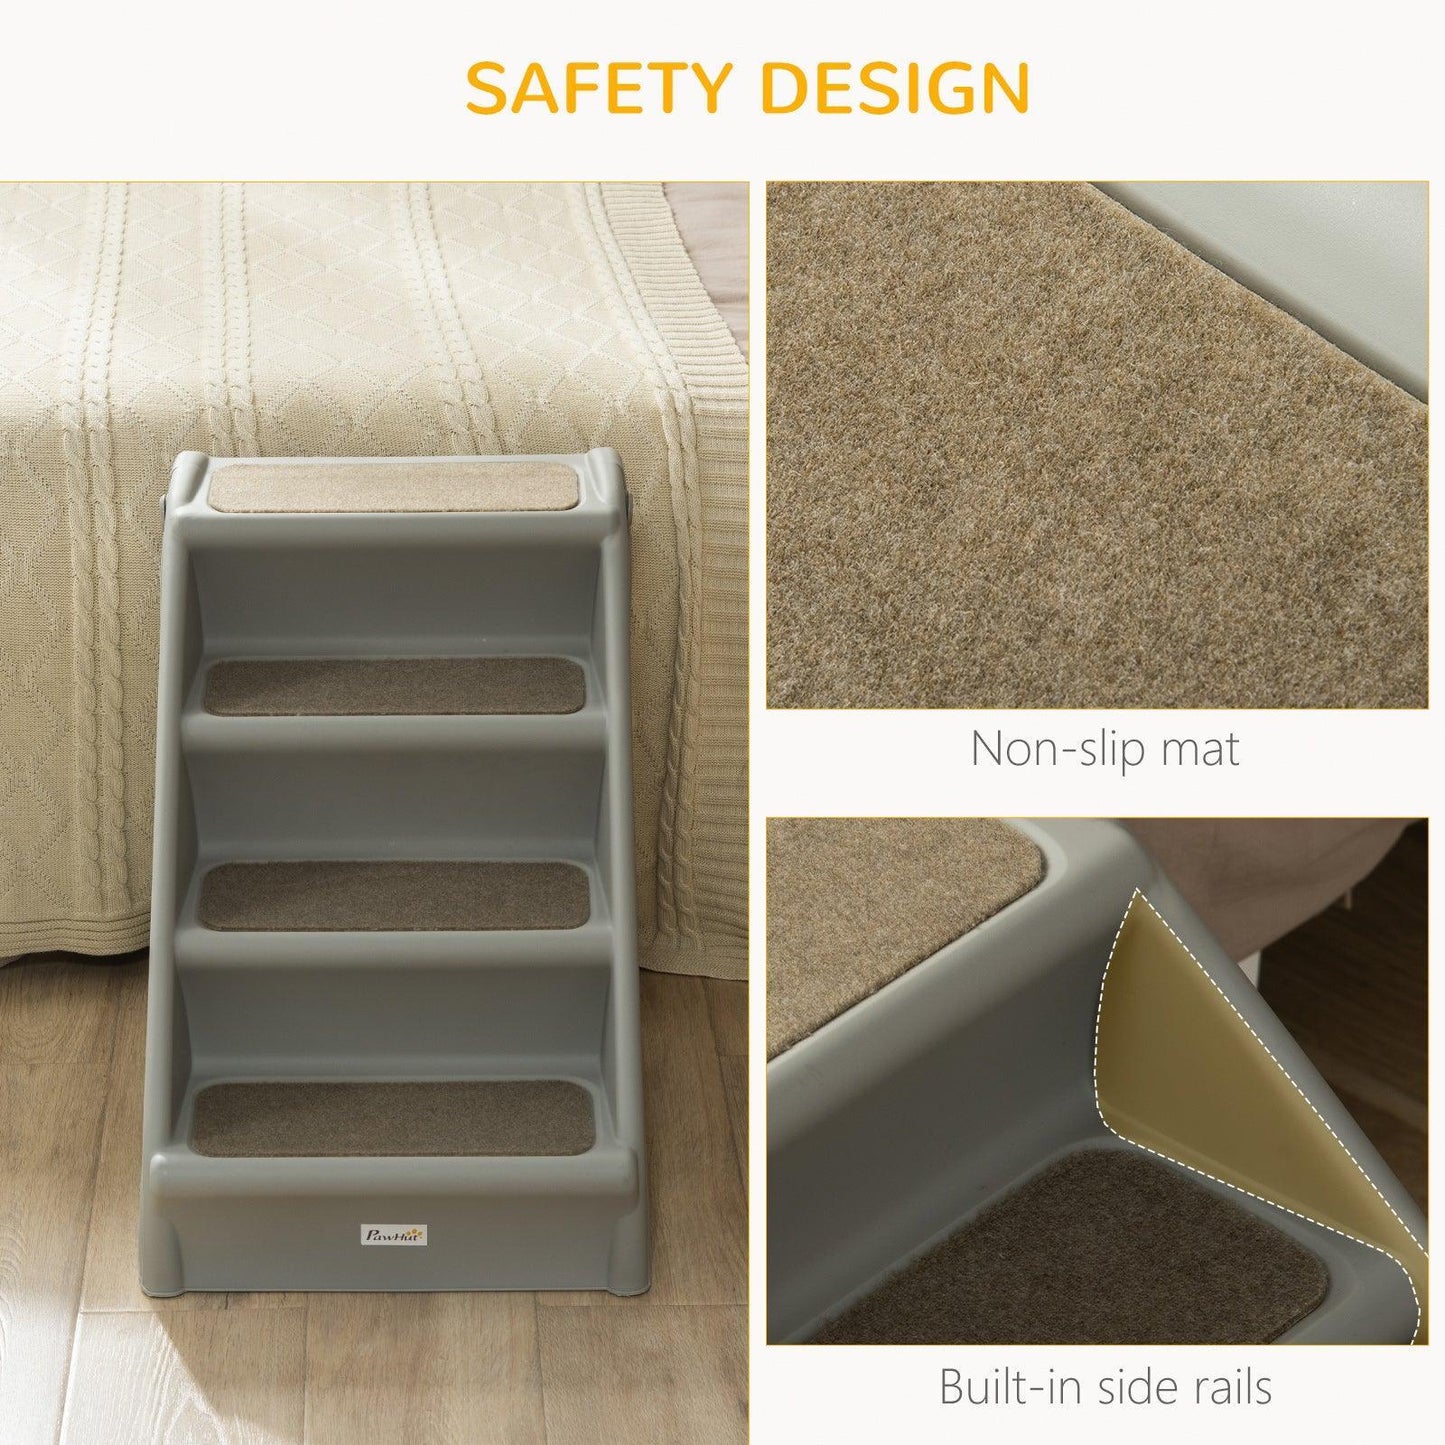 PawHut 4-Step Pet Stairs, Ideal for Cats & Small Dogs, Non-slip, Grey - ALL4U RETAILER LTD